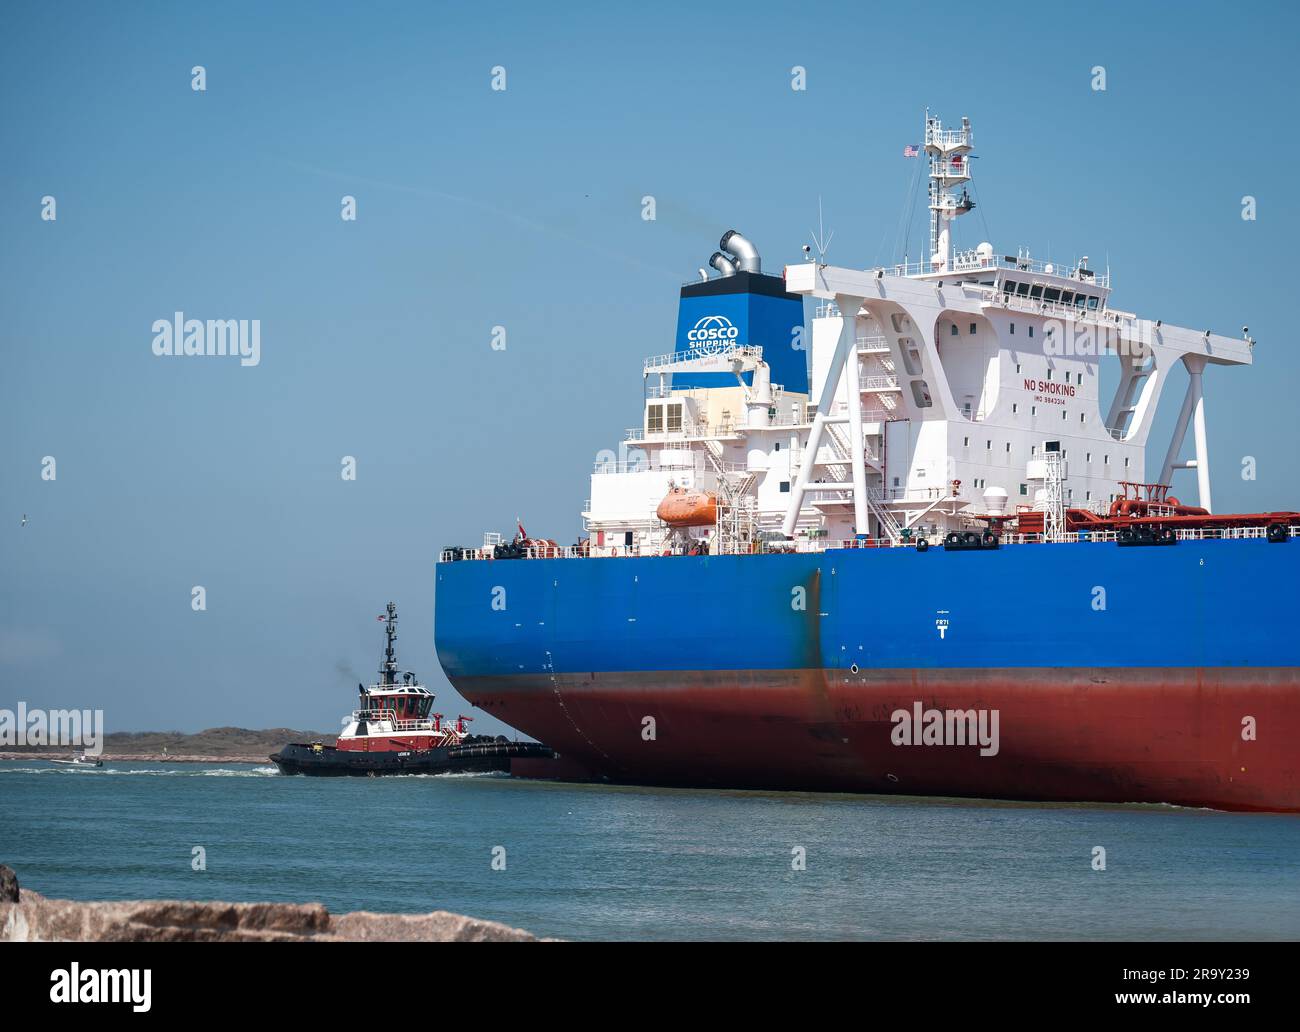 PORT ARANSAS, TX - 26 FEB 2023: Stern of YUAN FU YANG, a Crude Oil Tanker Ship, and tugboat, sailing past the South Jetty on the shipping channel. Stock Photo